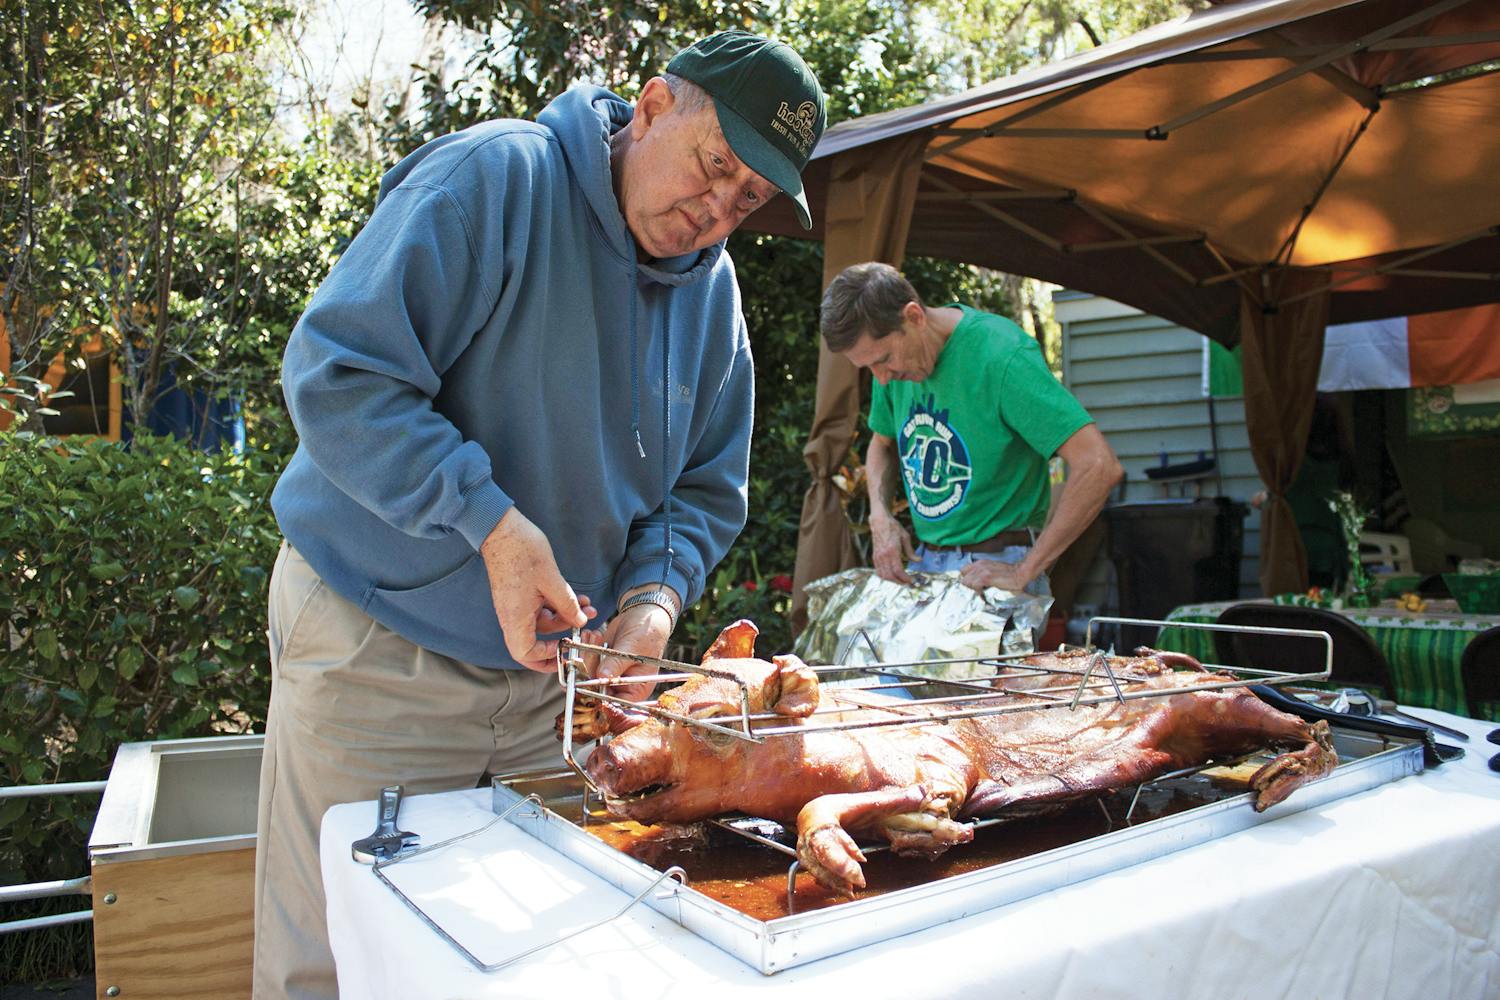 Jim Ferrer, the former assistant vice president of finance and planning at UF, hosted a St. Patrick’s Day party Saturday at his house to celebrate the holiday for the past five or six years.
 
 